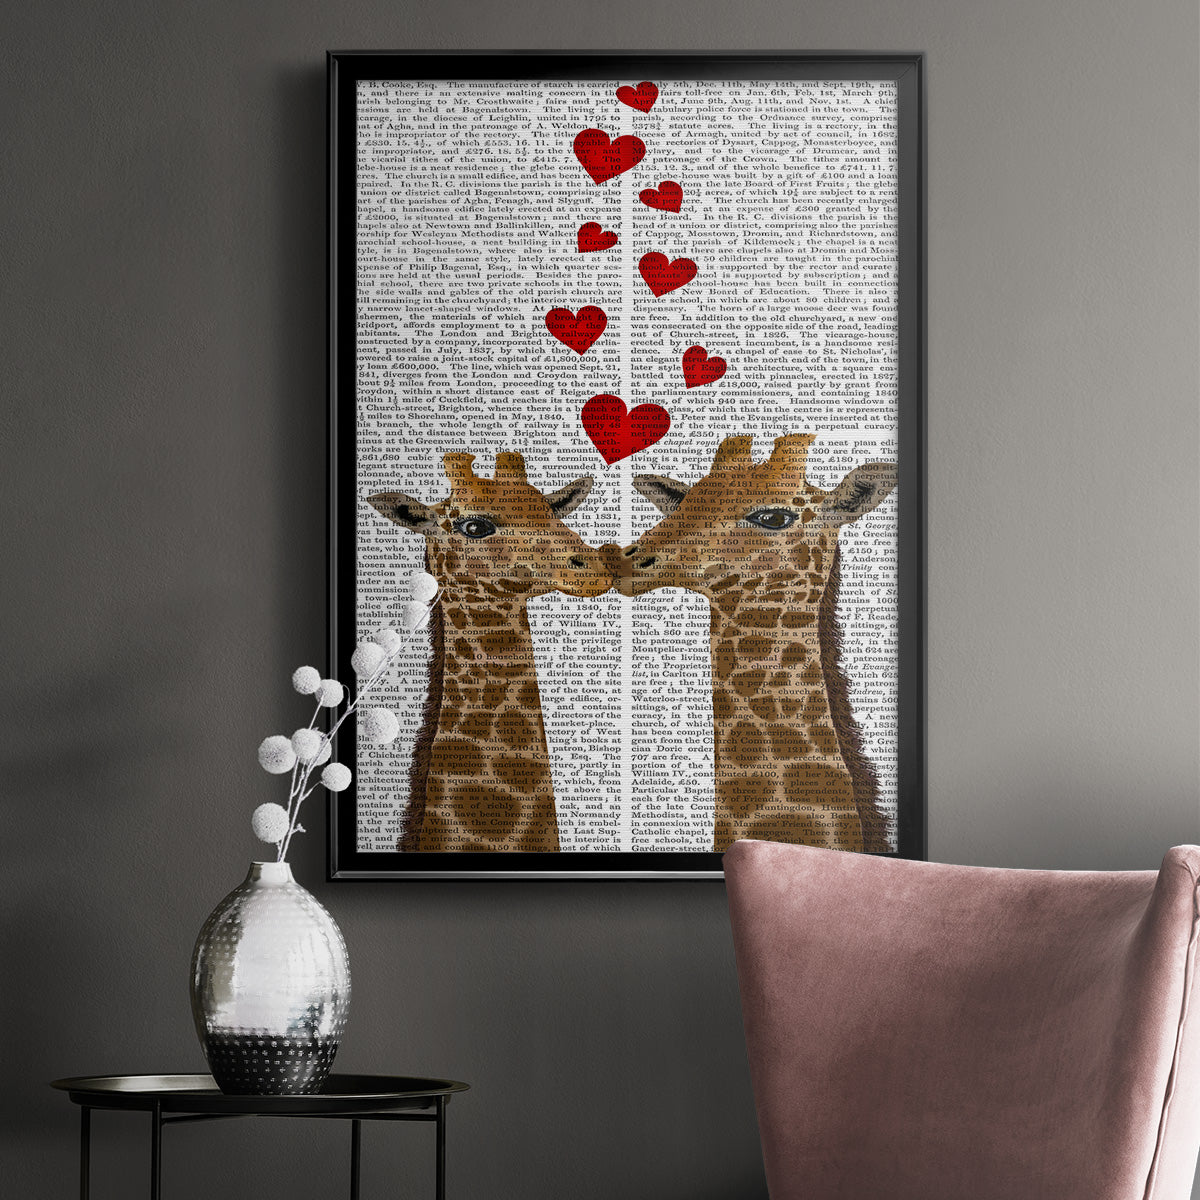 Love is in the Air Collection B Premium Framed Print - Ready to Hang